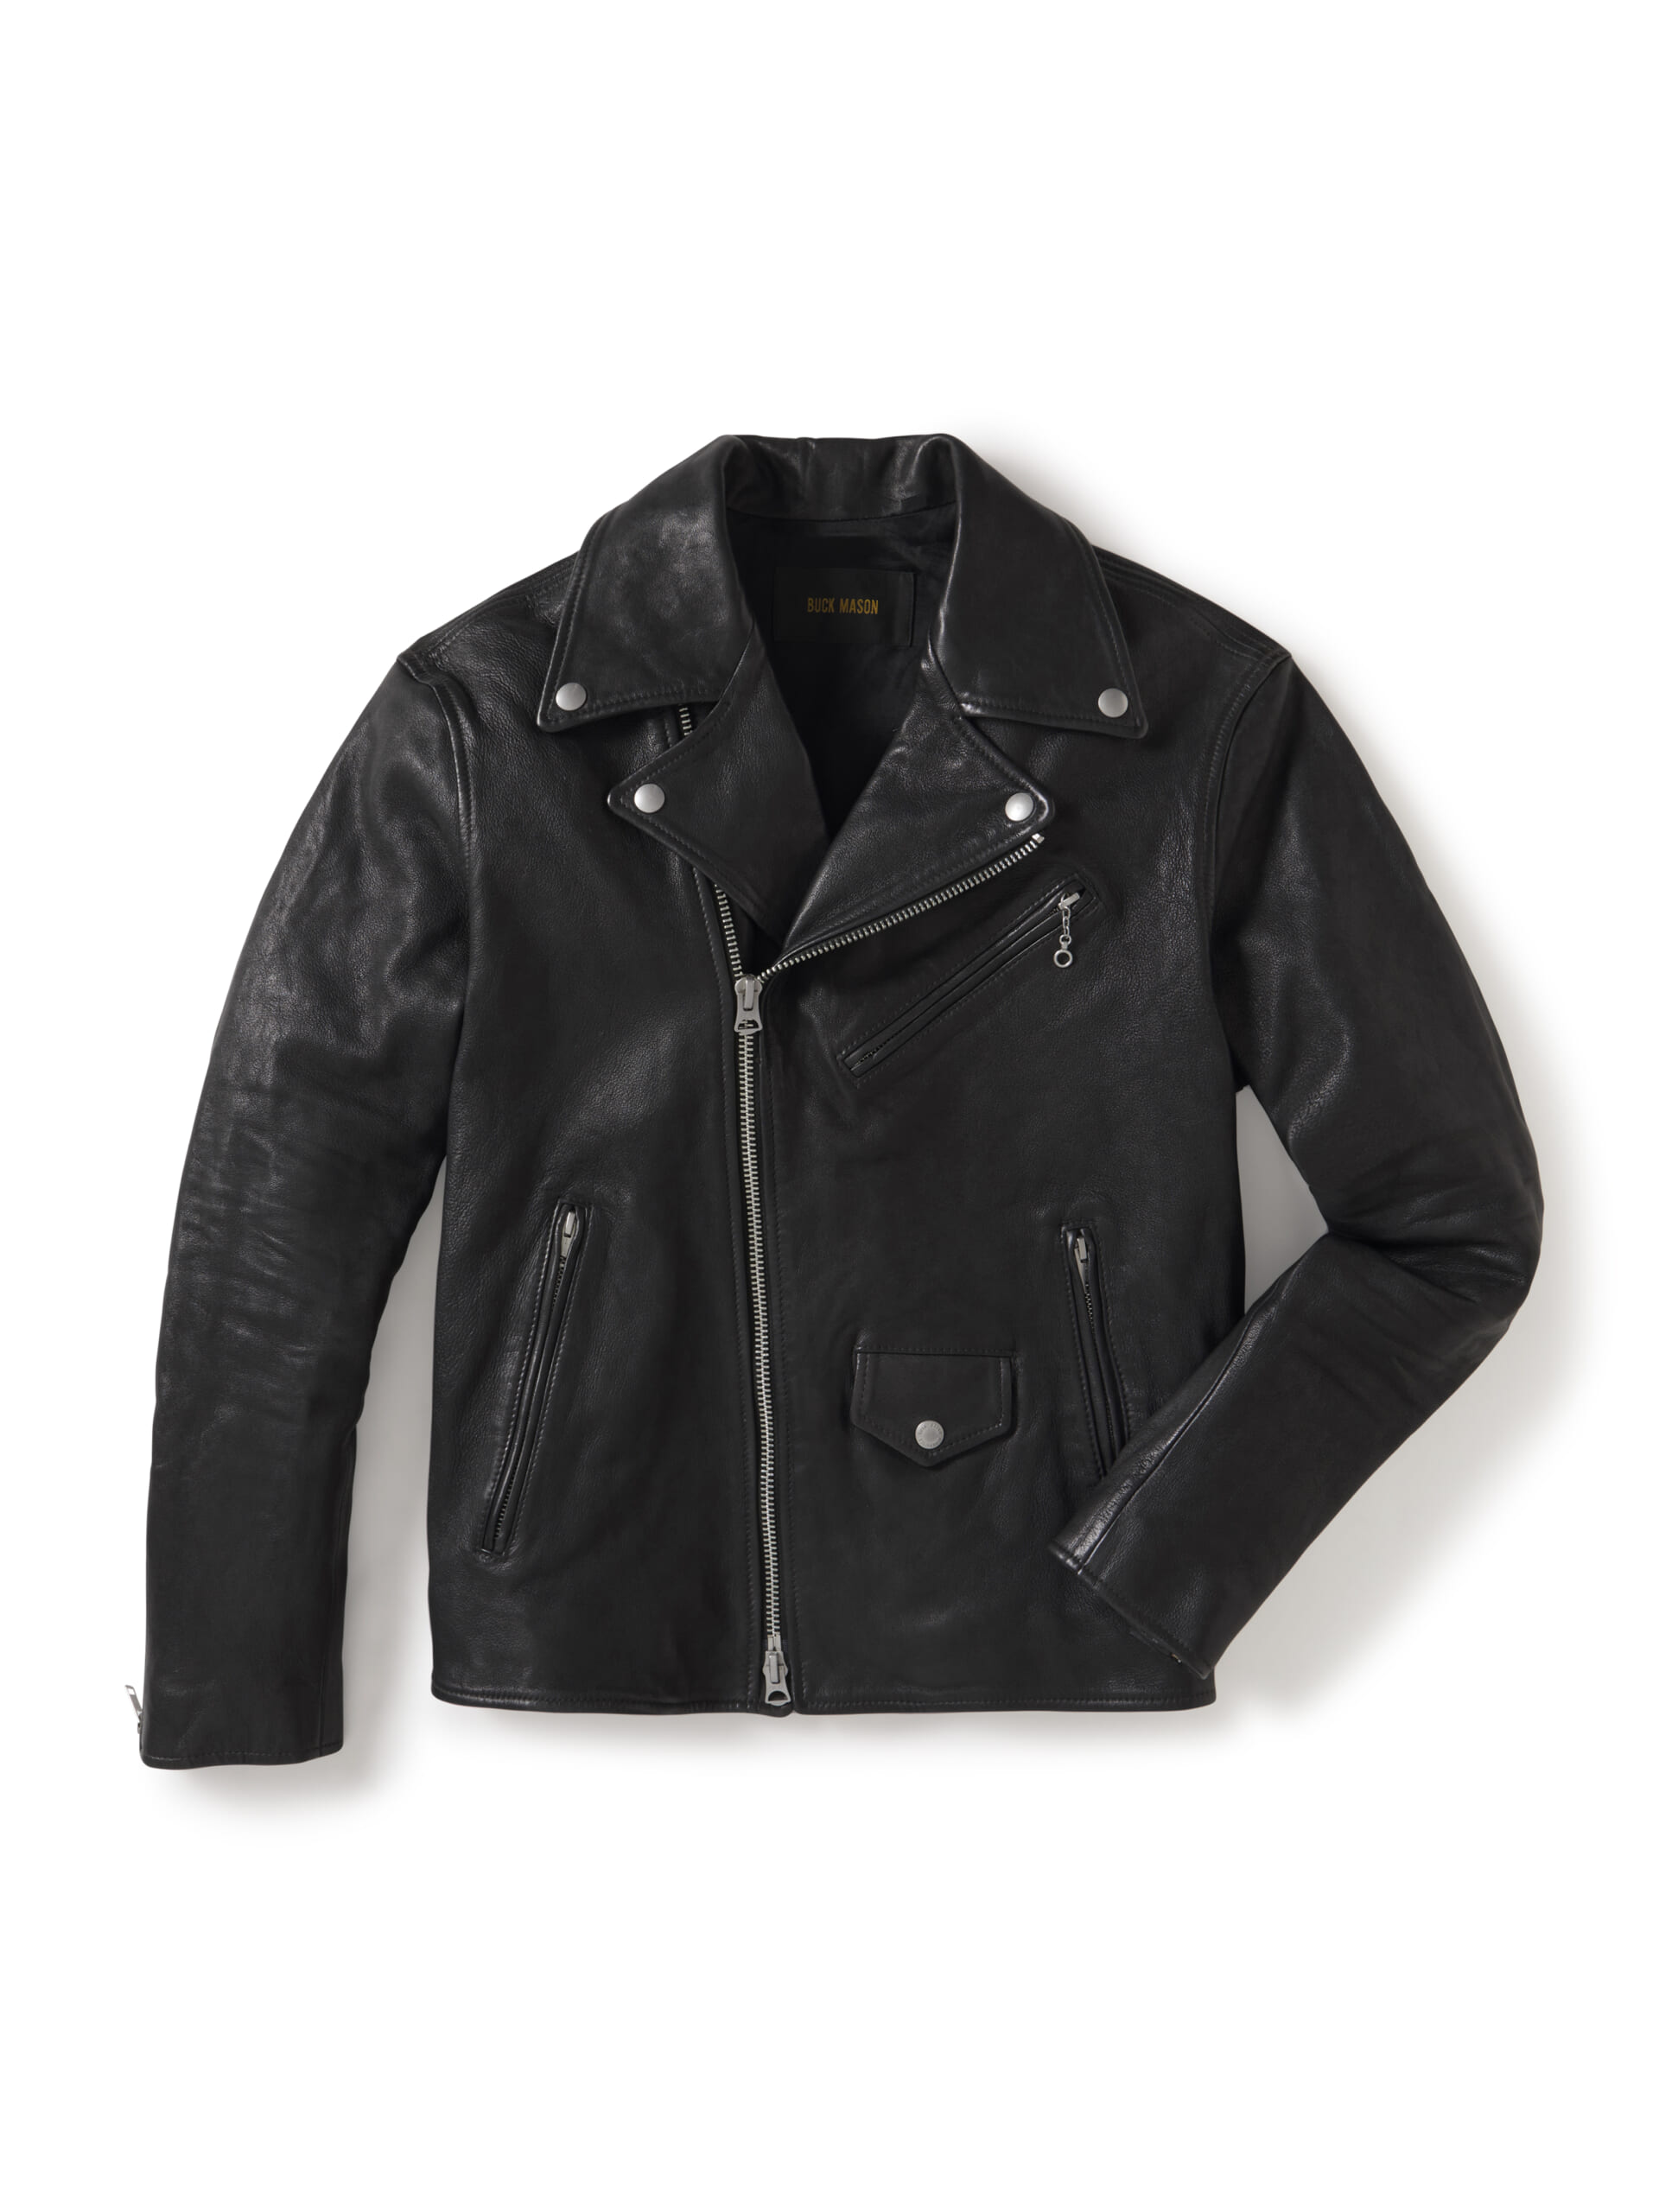 Level Up Your Leather Jacket Game With These Updated Classics - Maxim